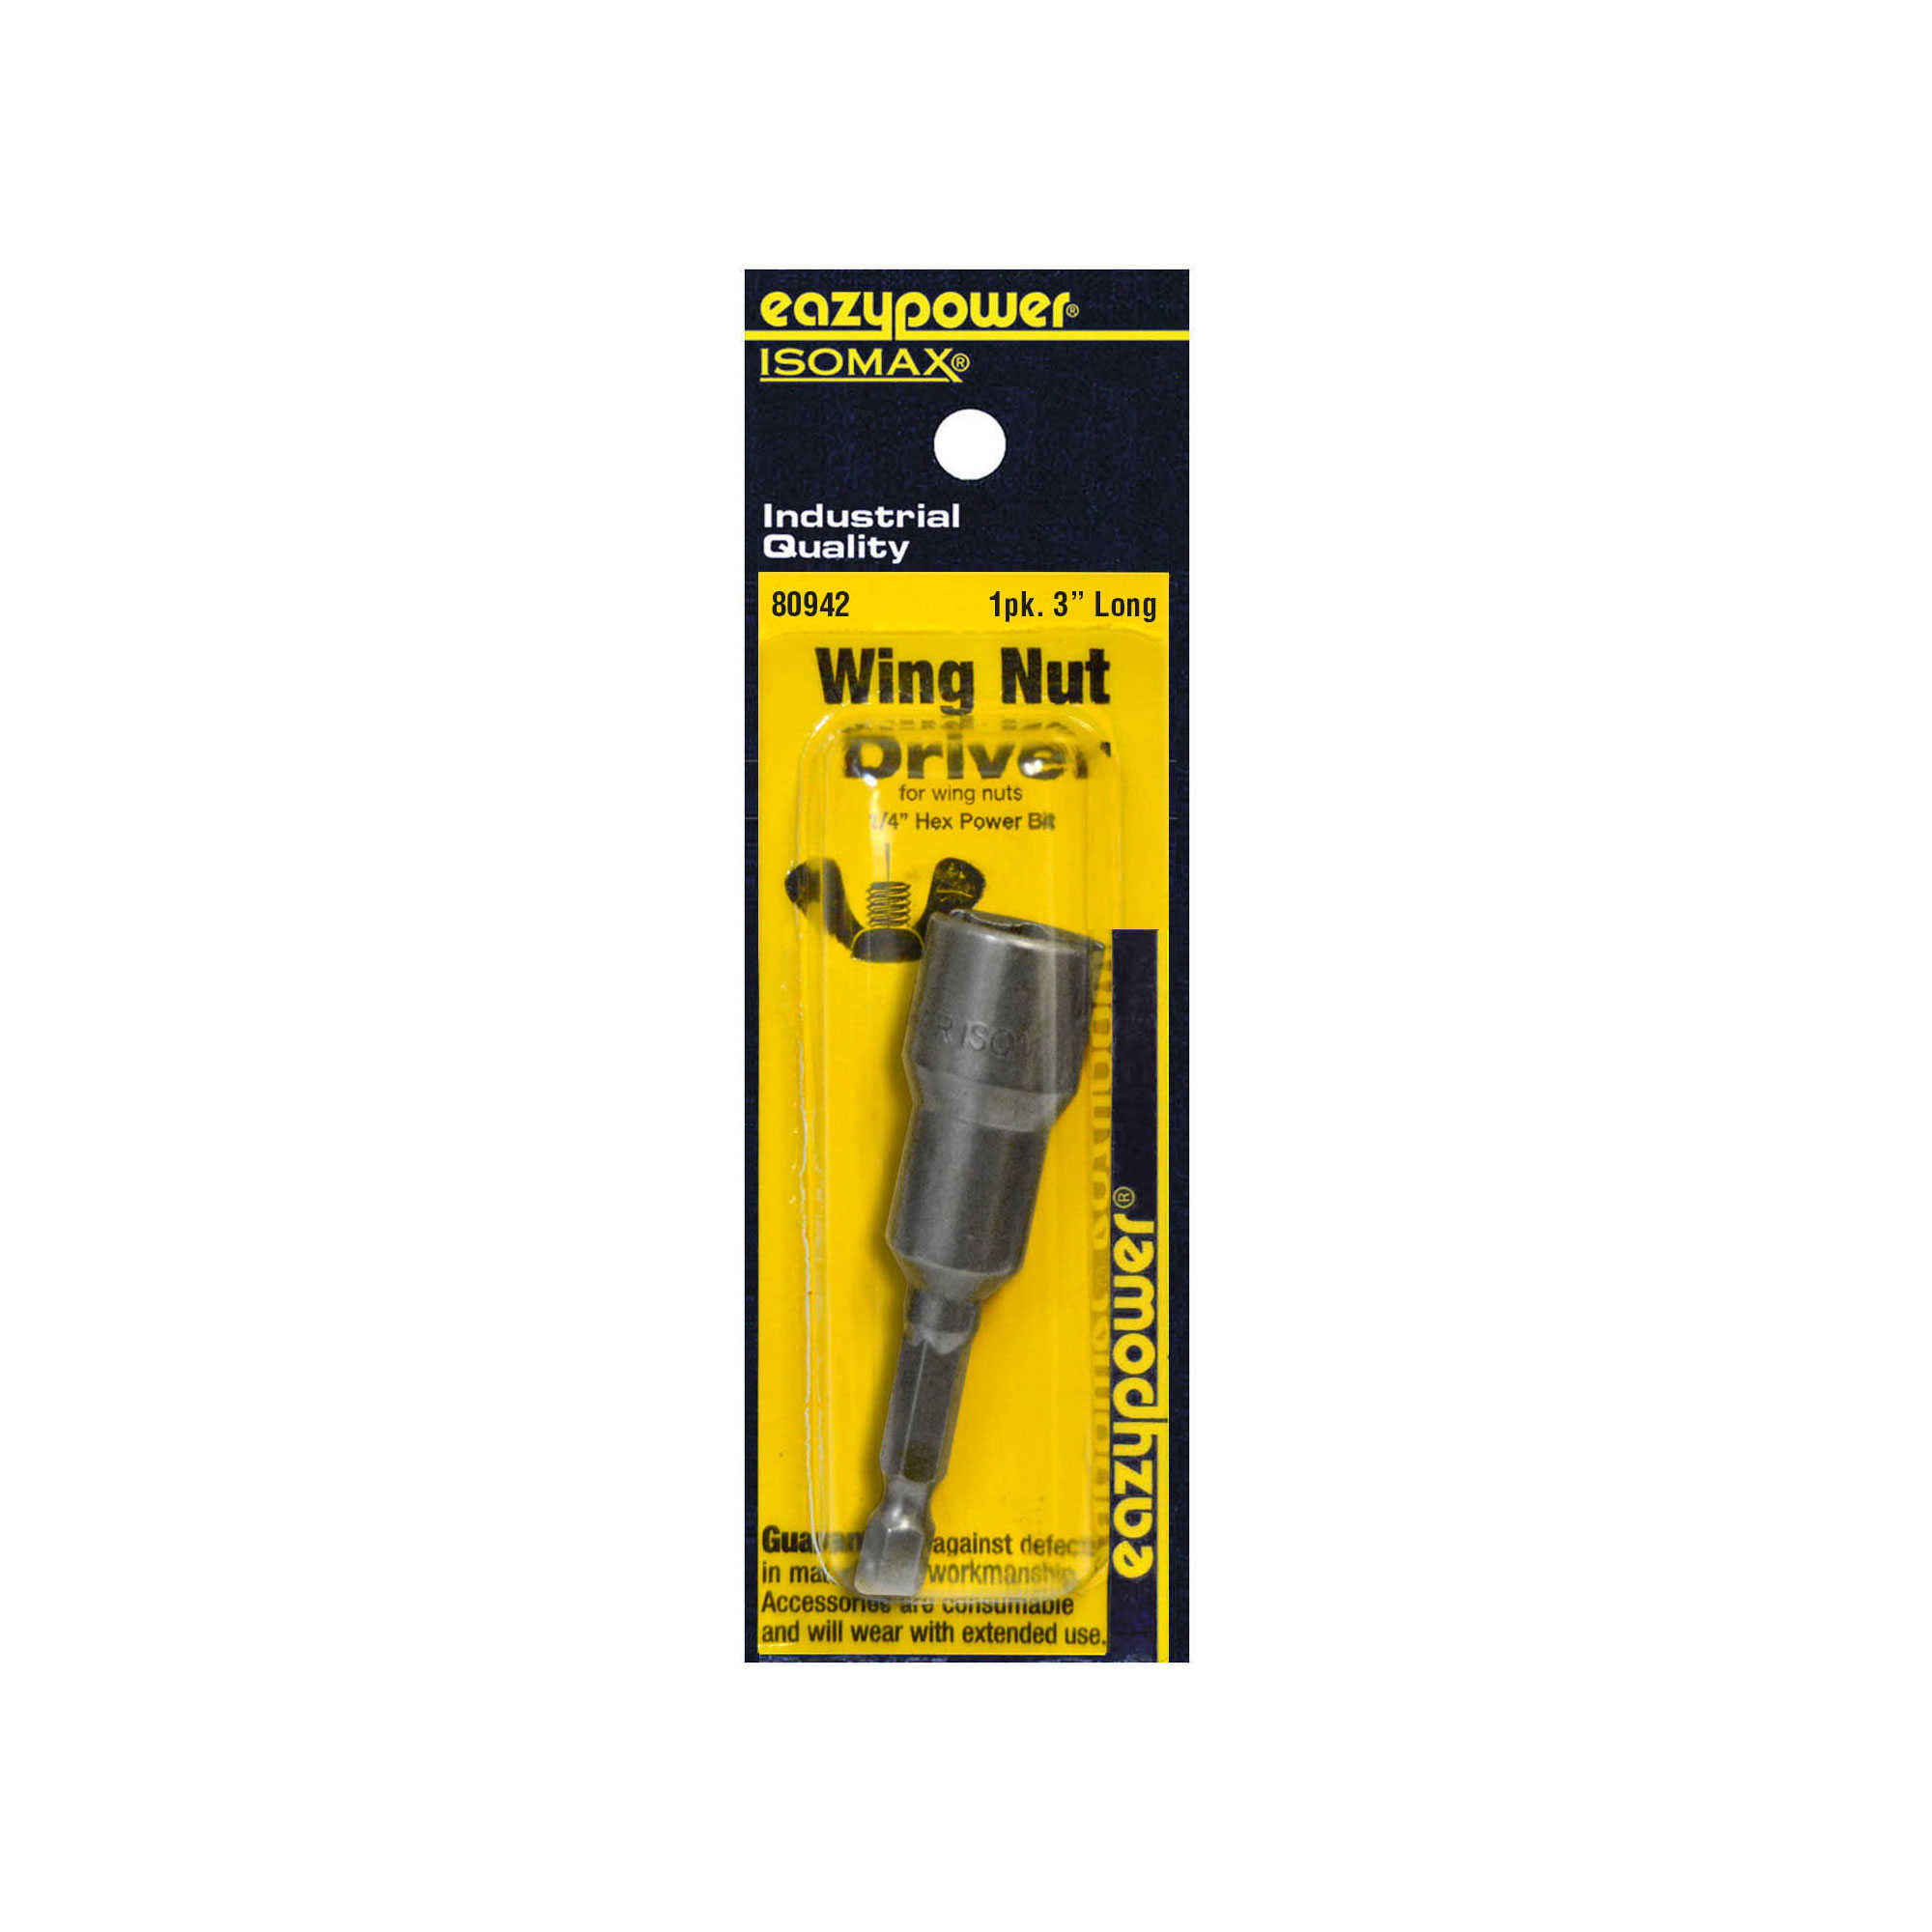 Eazypower Wing Nut Driver, 3', 1/4' Hex